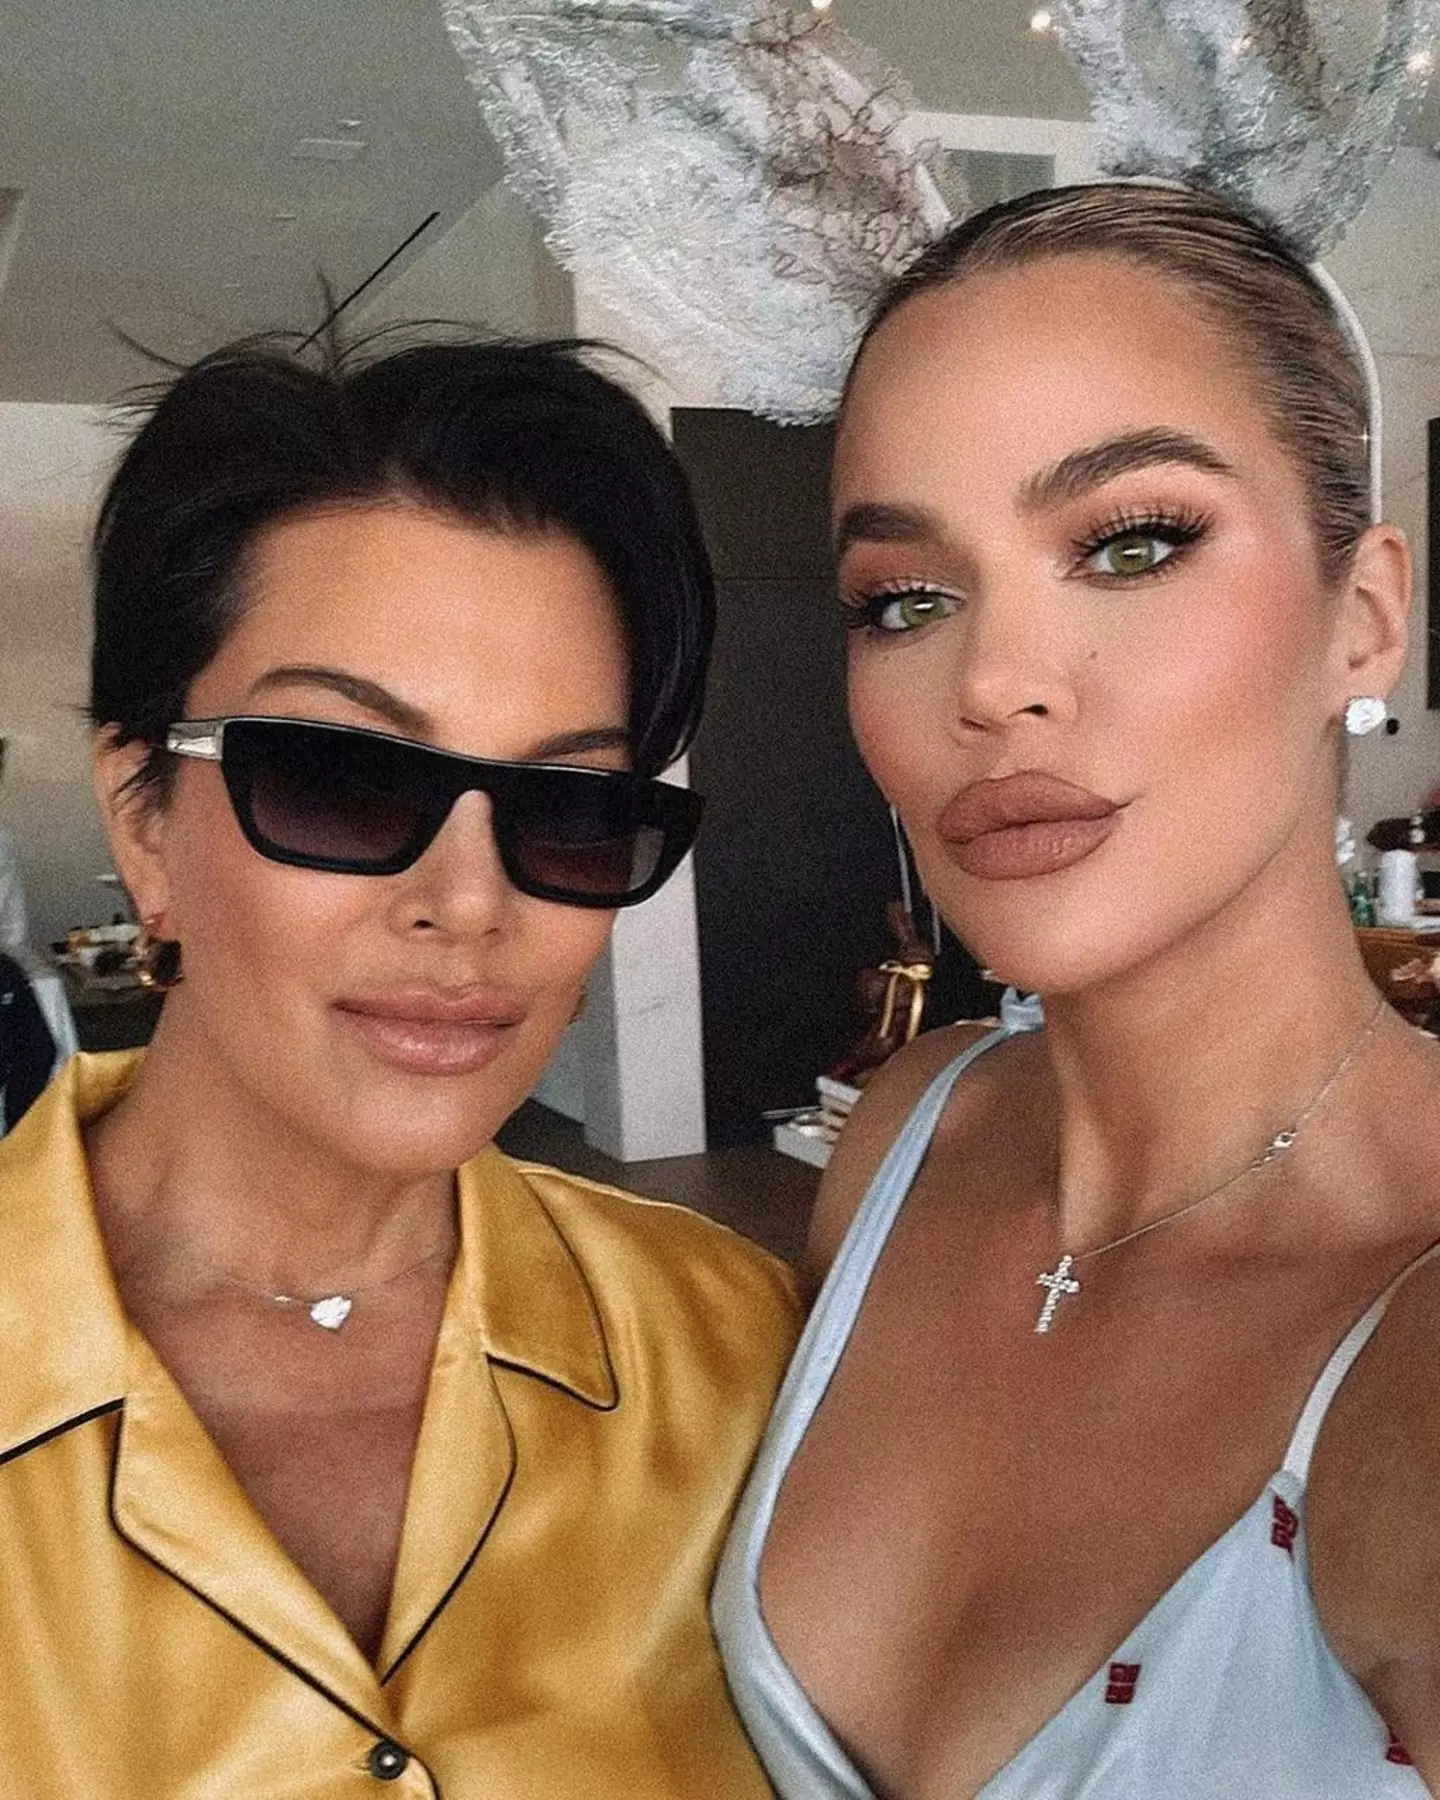 People are still calling Khloé Kardashian out over her edited photos as she shared a couple of recent snaps with her mum Kris Jenner on the 'gram.